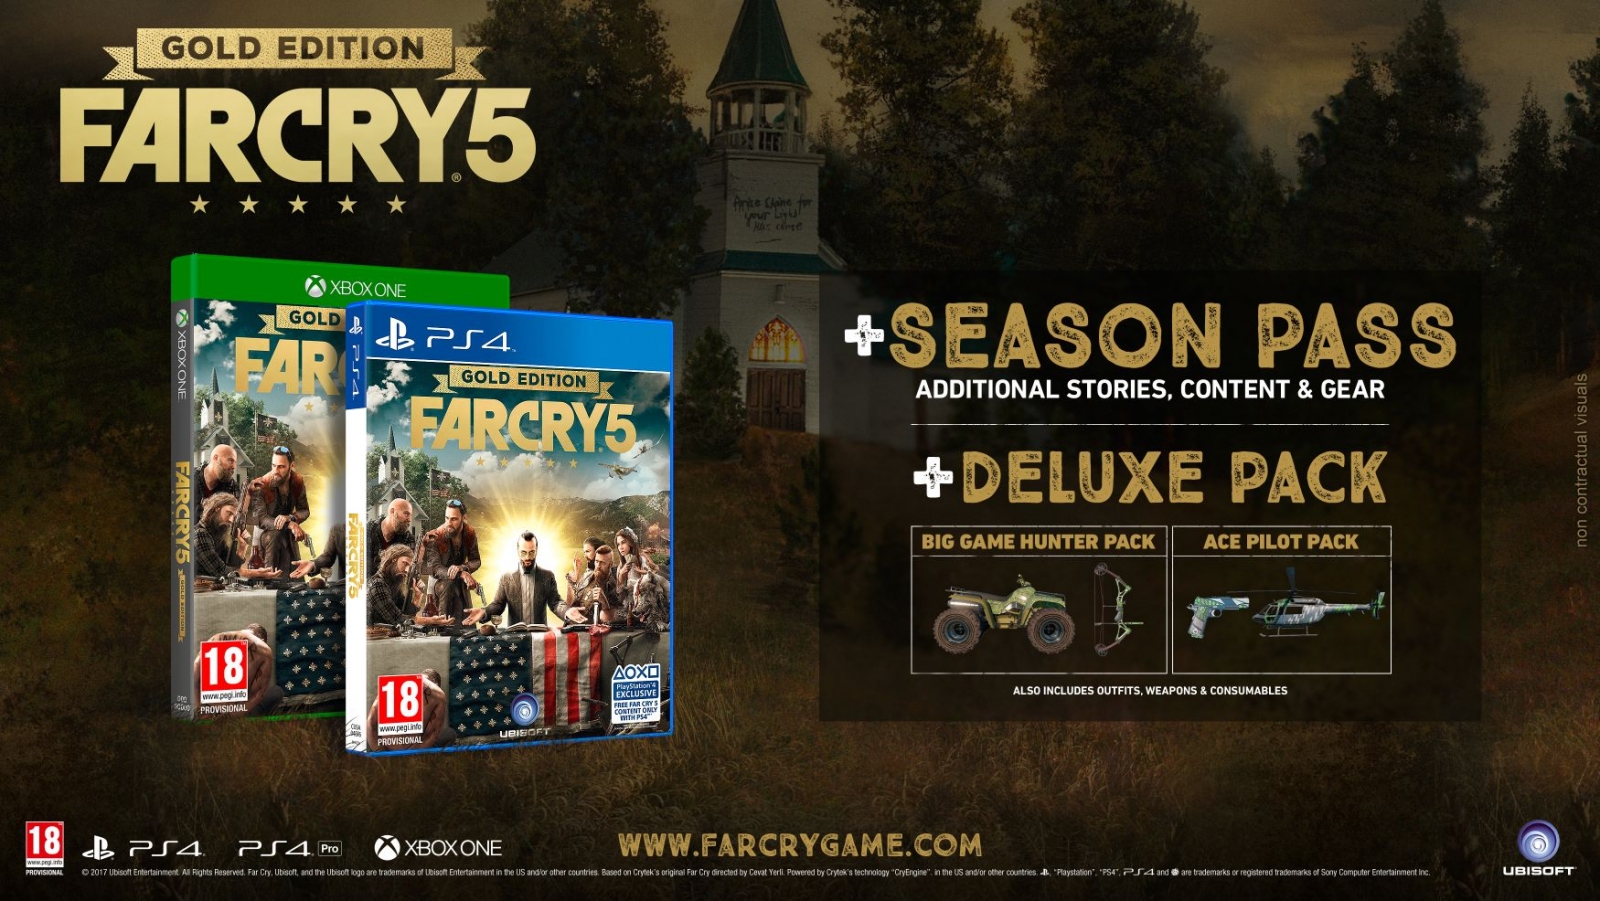 PS4 Far Cry 5 Gold Edition